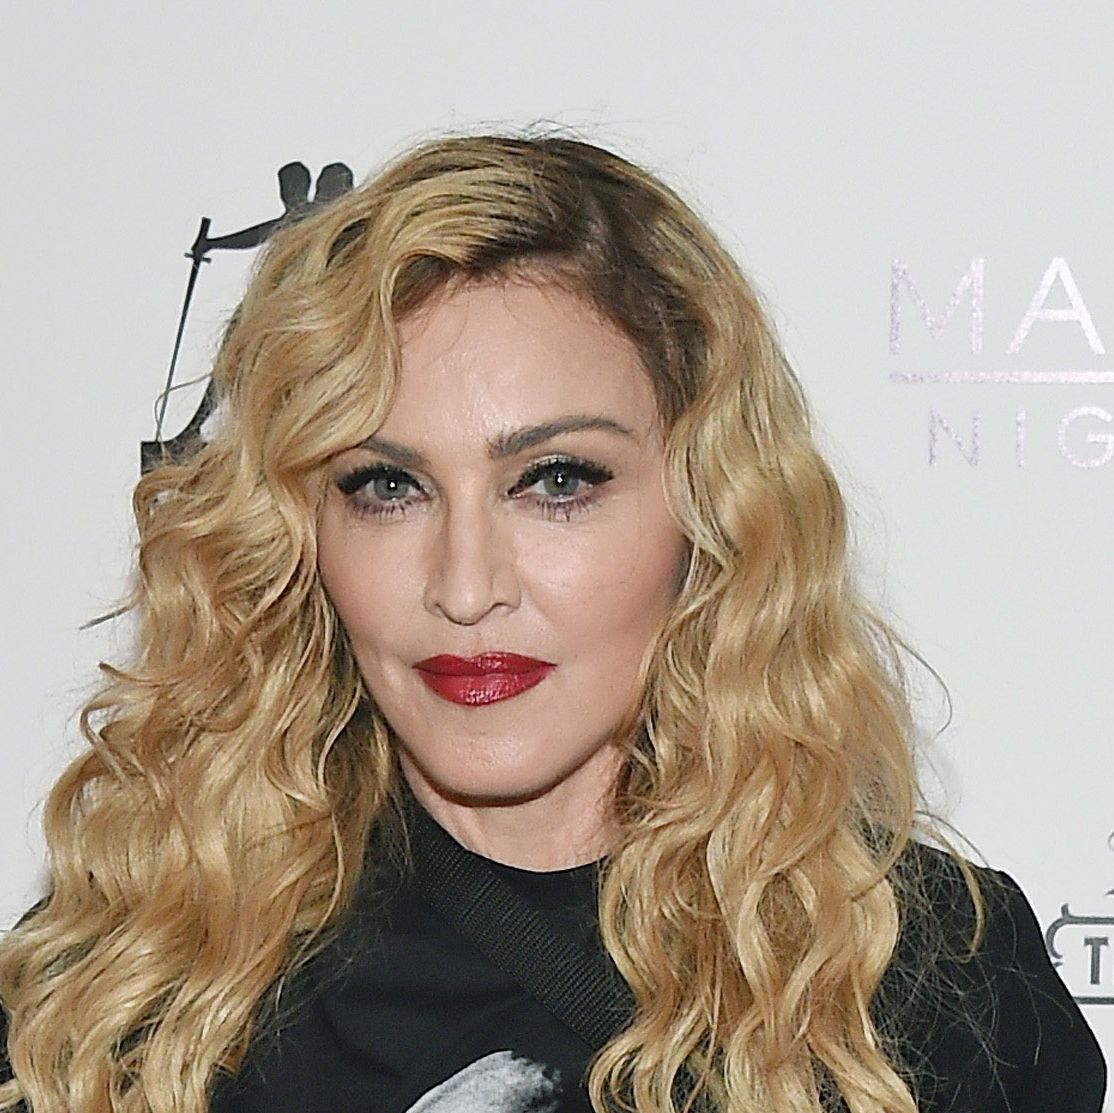 Madonna Has Sculpted Legs In Fishnets And Tiny Shorts In IG Pics